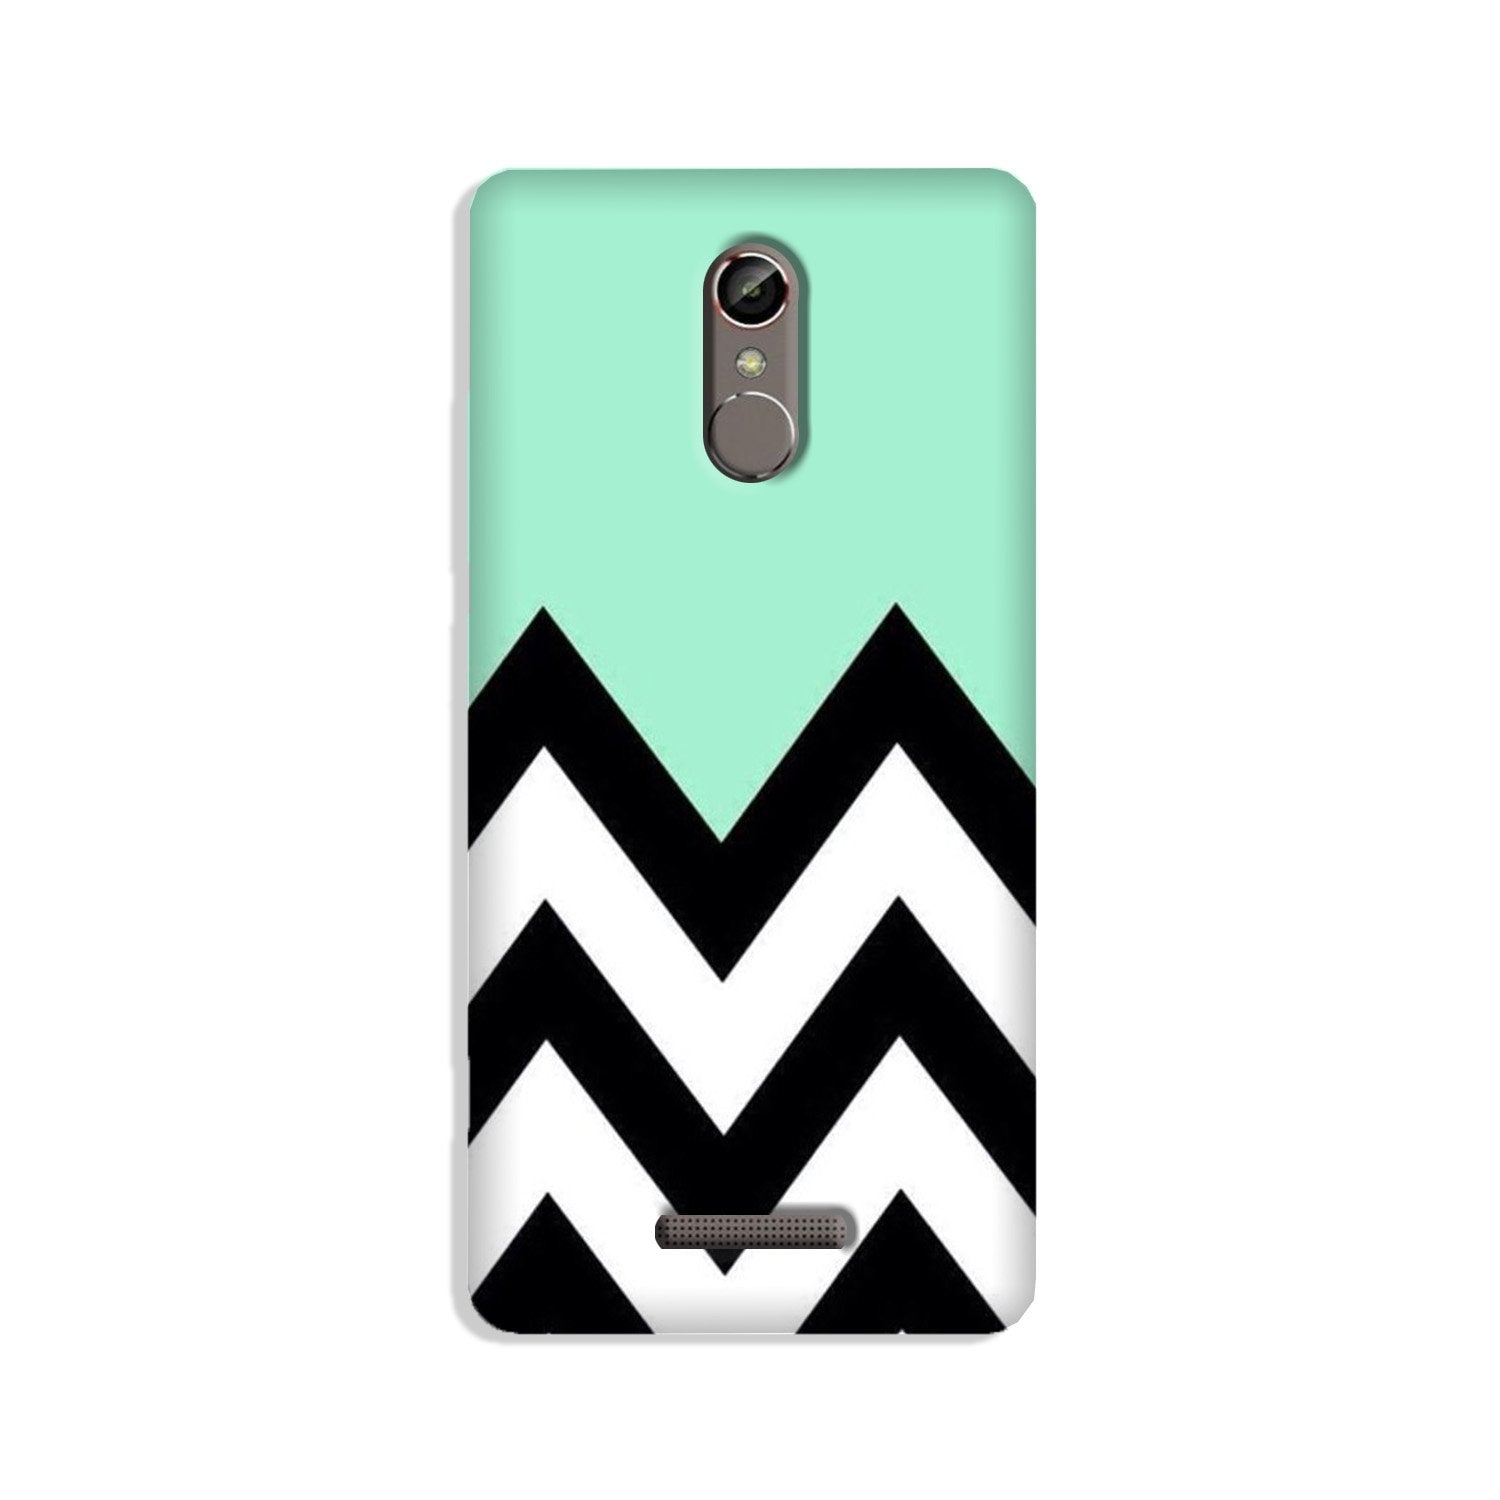 Pattern Case for Gionee S6s